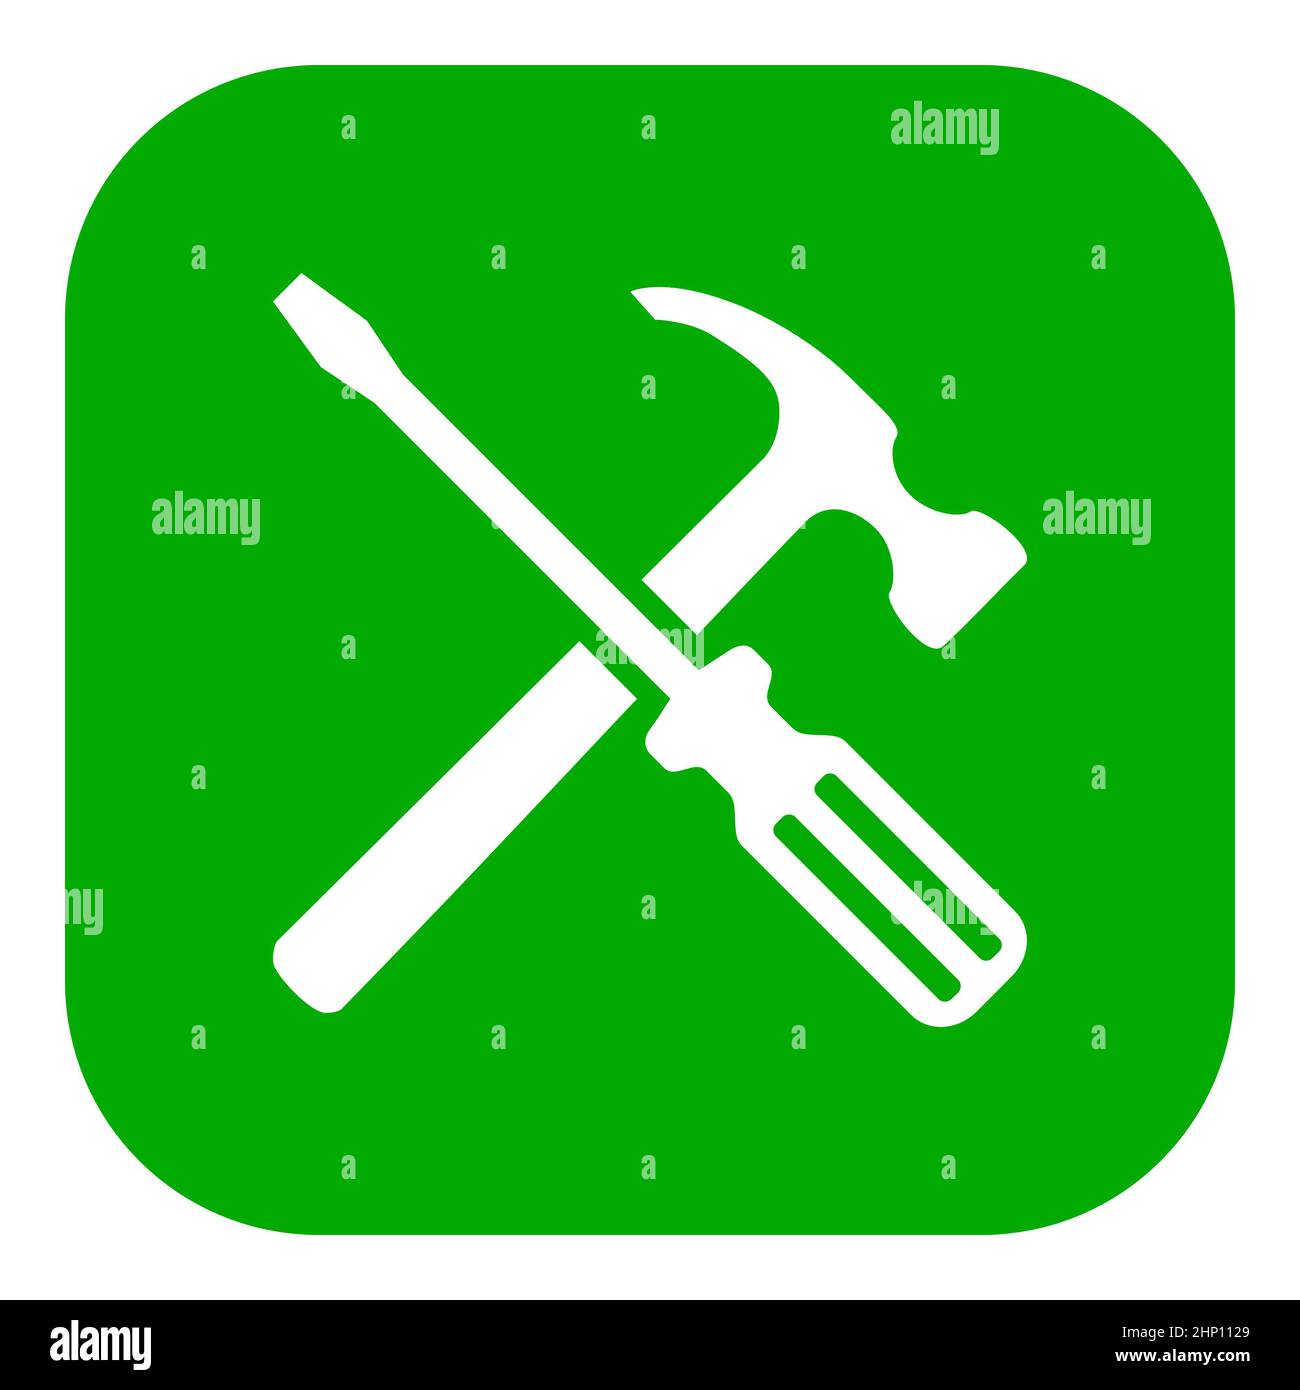 Tools and app icon Stock Photo